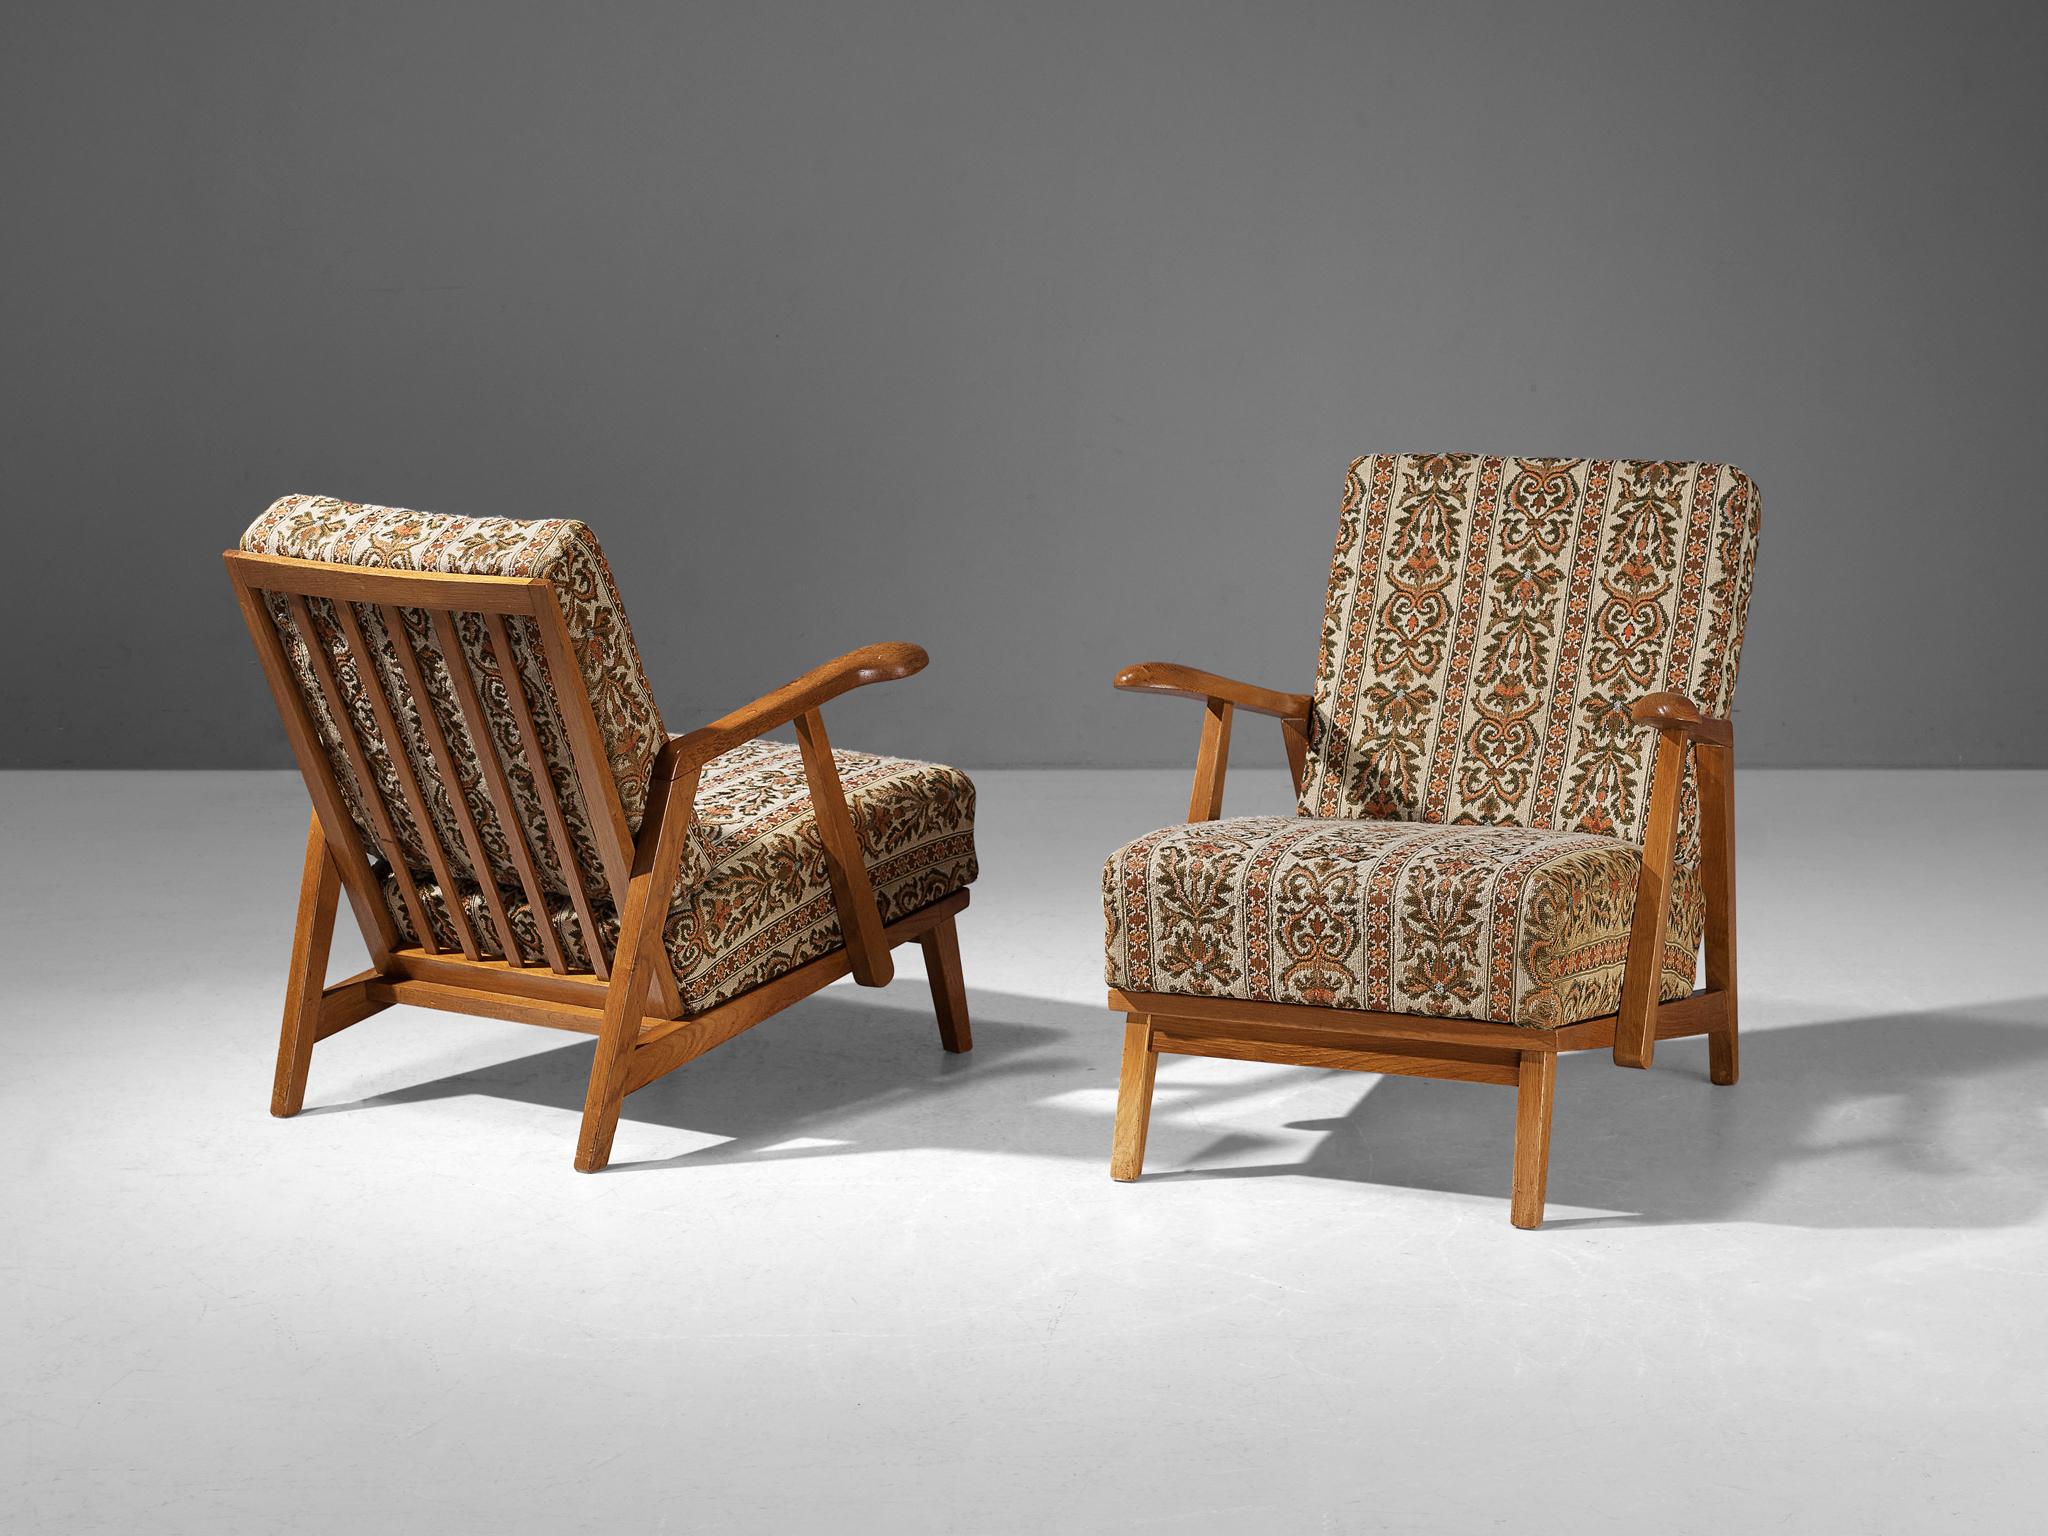 Pair of lounge chairs, oak, Czech Republic, 1950s

These beautifully designed lounge chairs hold a striking construction by means of the sculpted elements discernible in the wooden frame. The armrests are characterized by curved, strong lines with